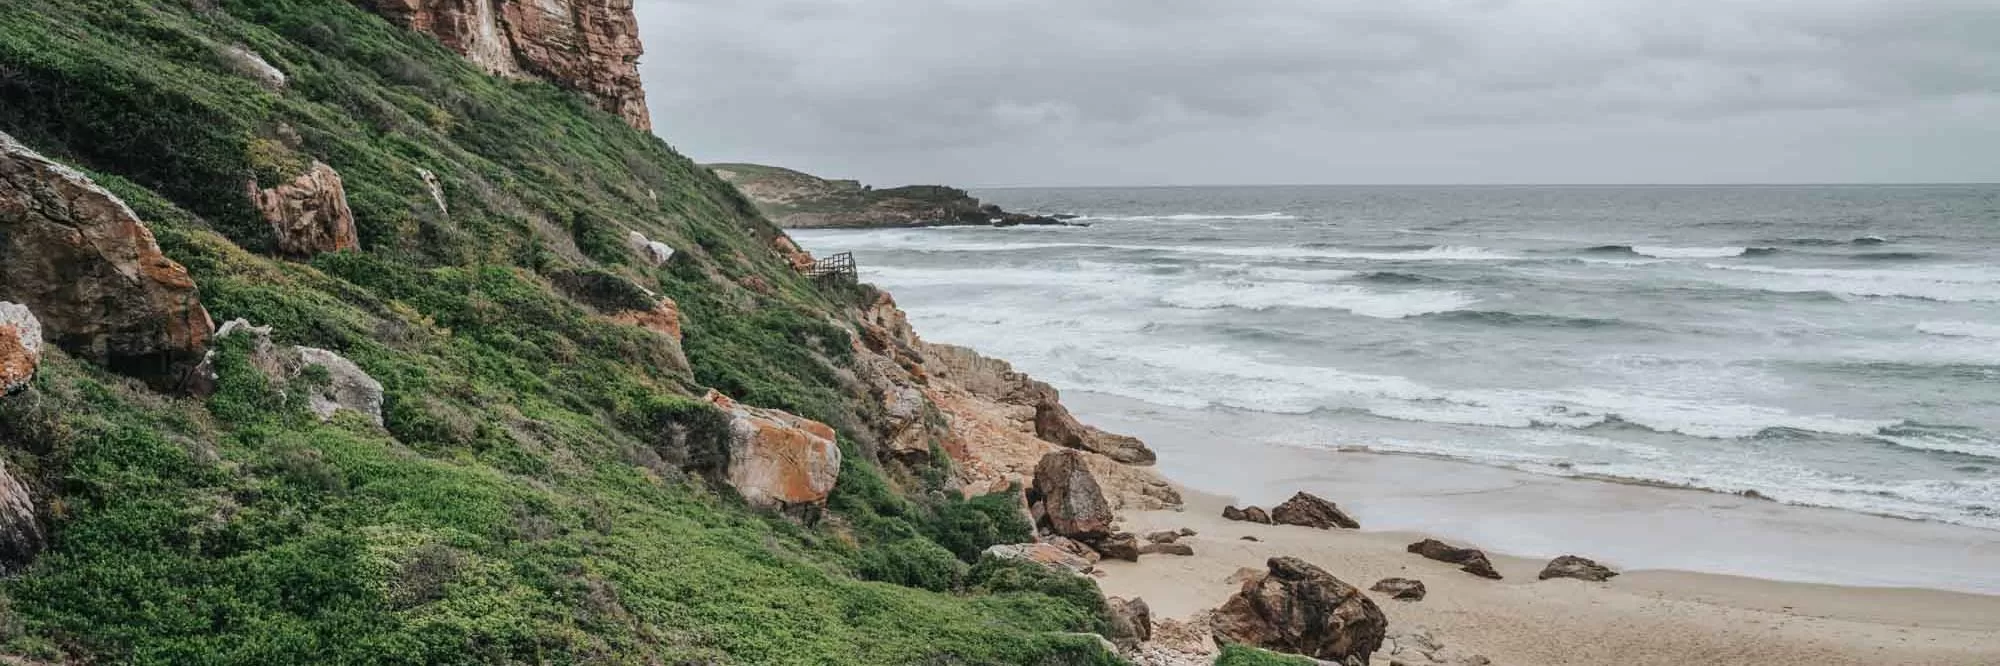 Garden Route of South Africa